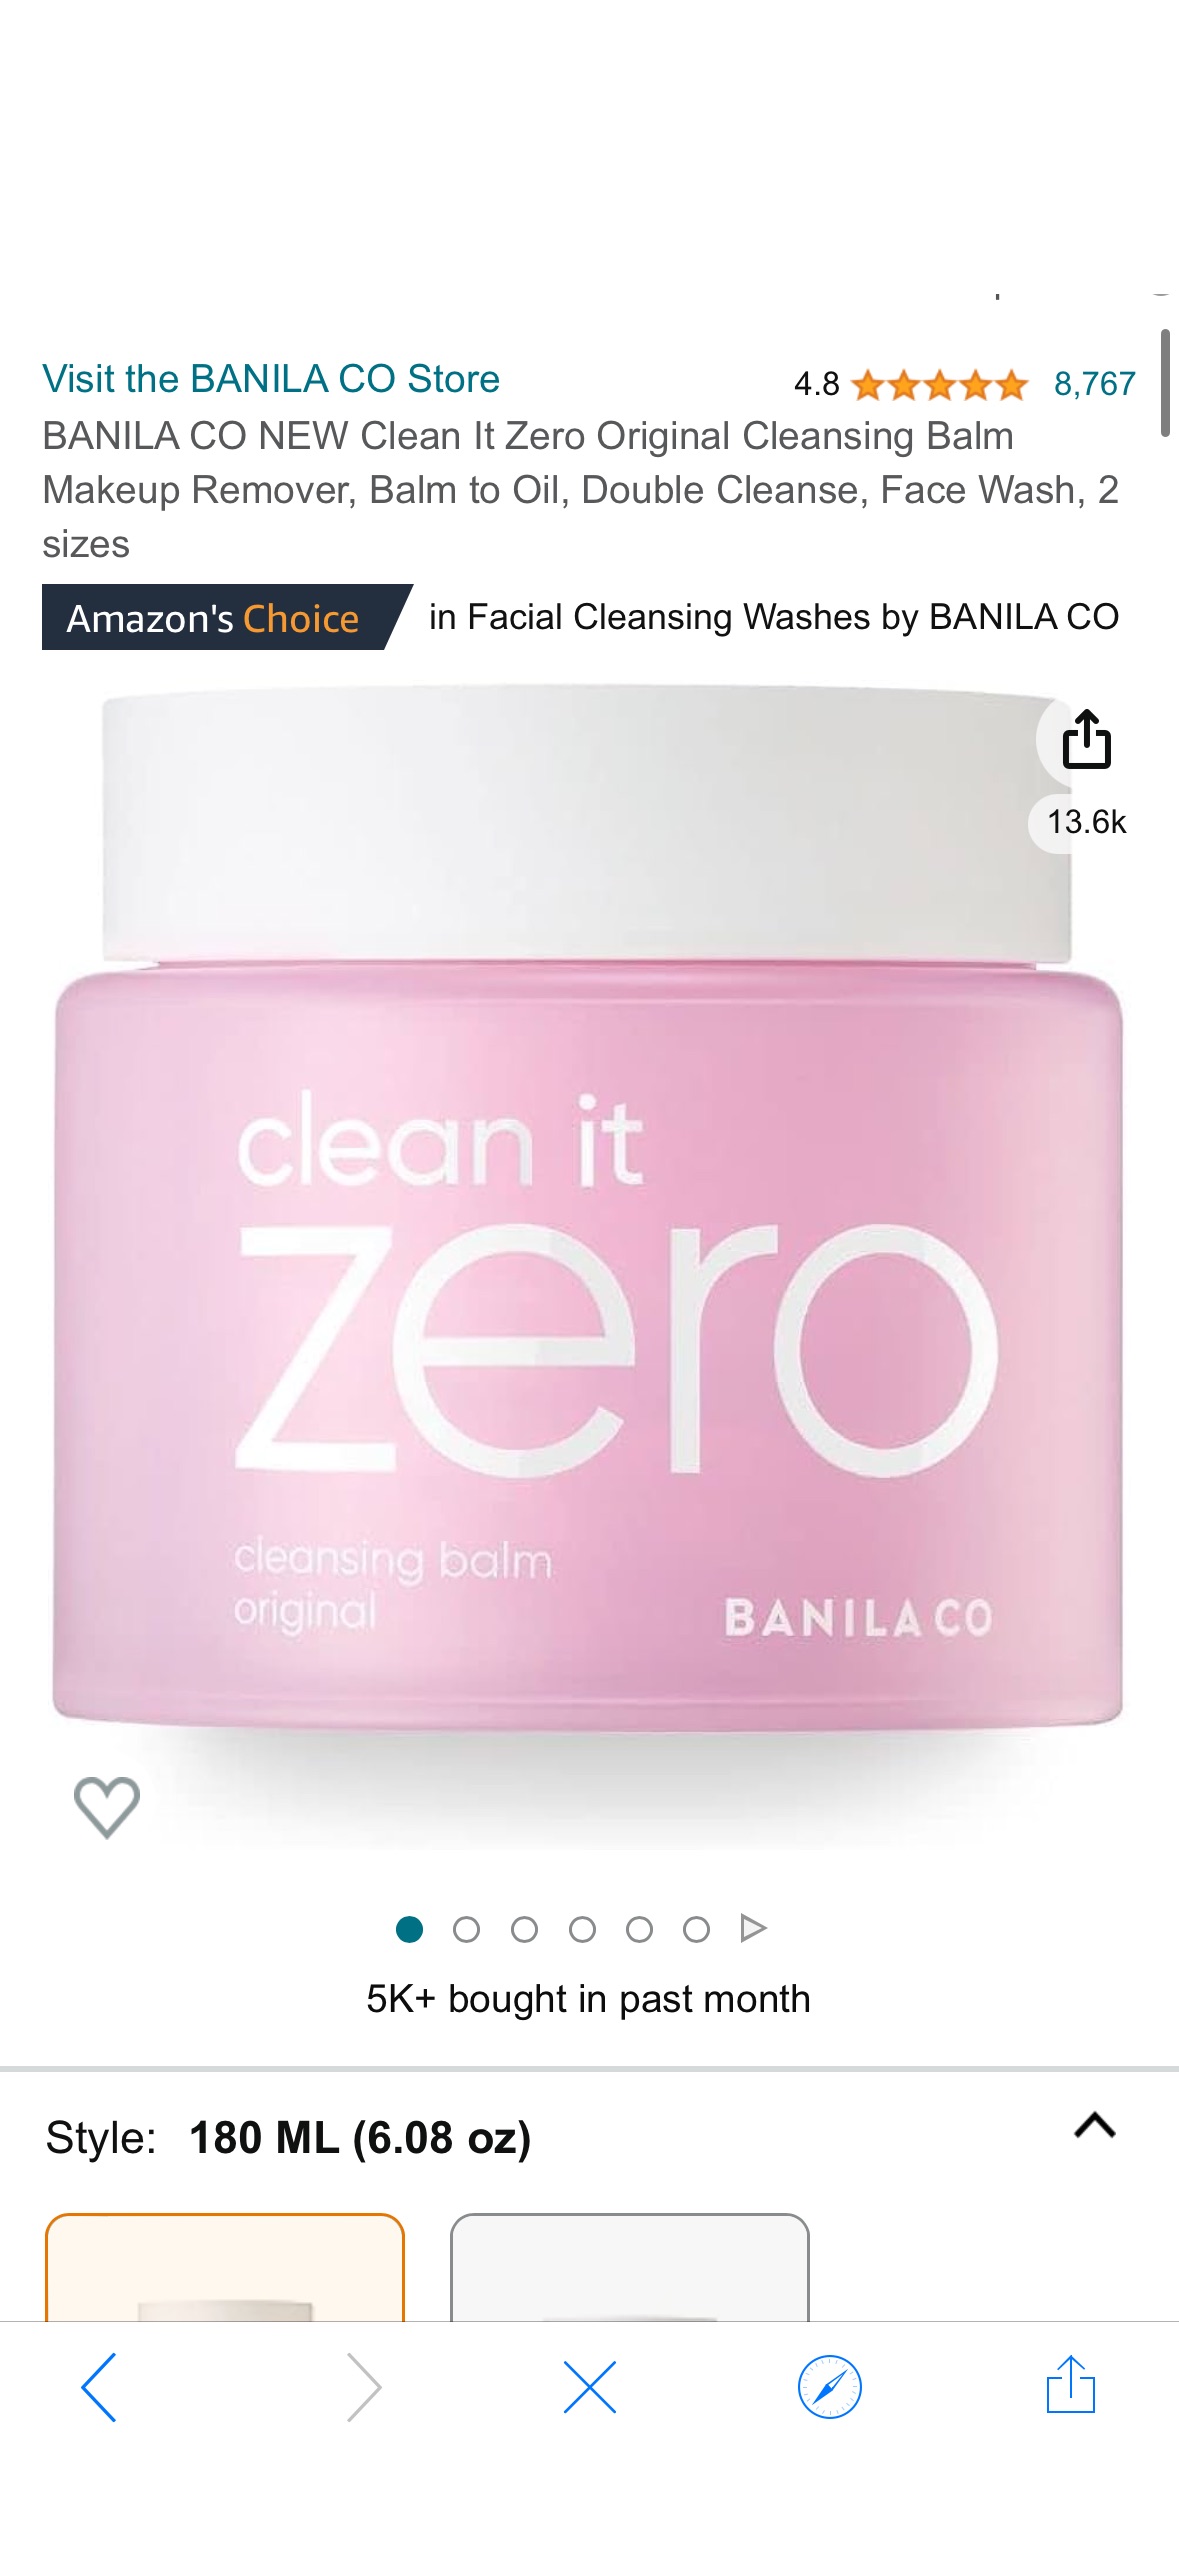 Amazon.com: BANILA CO NEW Clean It Zero Original Cleansing Balm Makeup Remover, Balm to Oil, Double Cleanse, Face Wash, 2 sizes : 卸妆膏